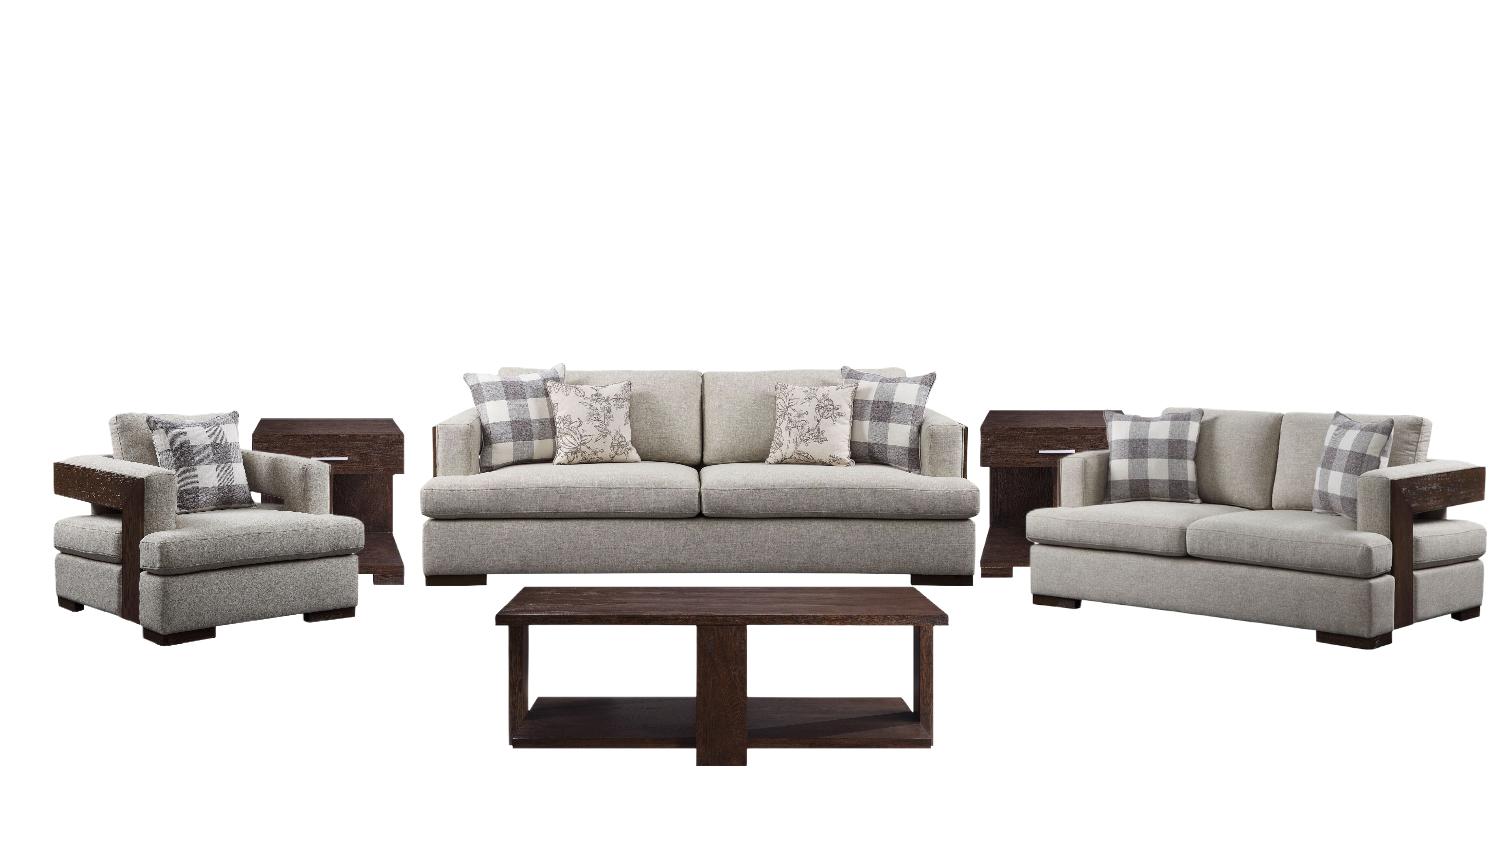 Transitional Sofa Loveseat Chair Coffee Table Two End Tables Niamey 54850-6pcs in Beige Fabric